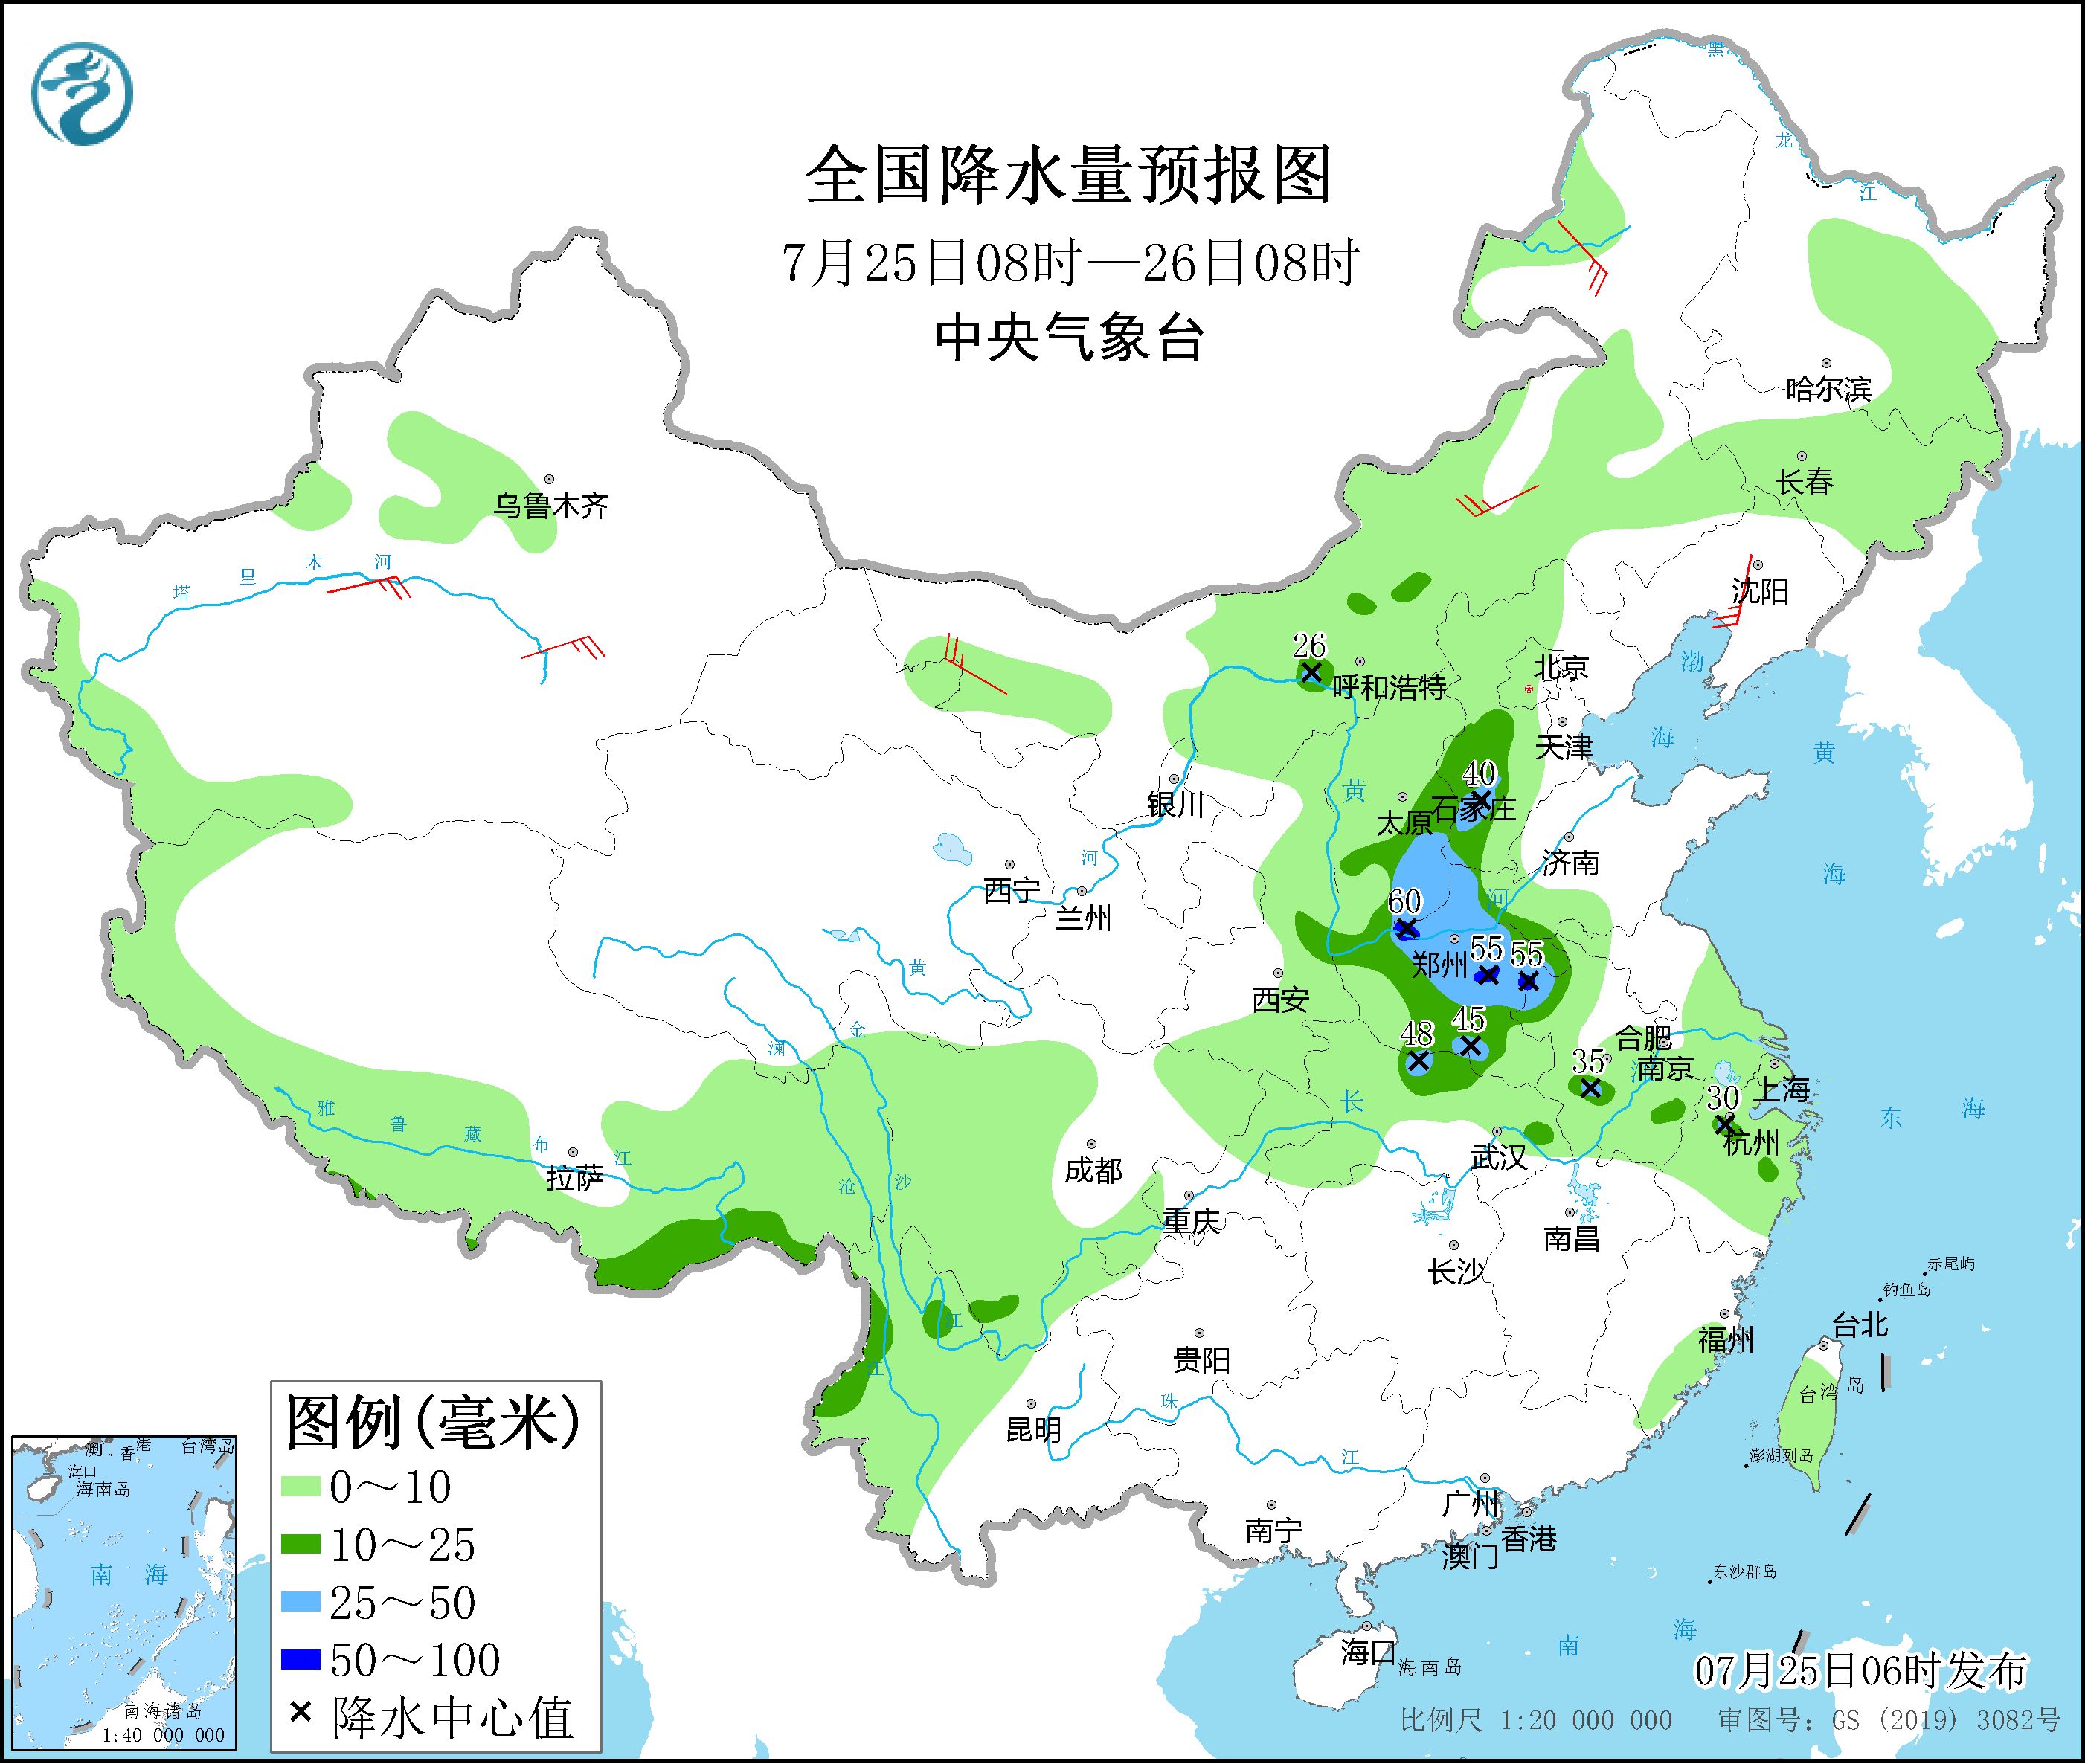 The high temperature weather in Jiangnan, South China and other places continues, and there will be a more obvious rainfall process in the northern region